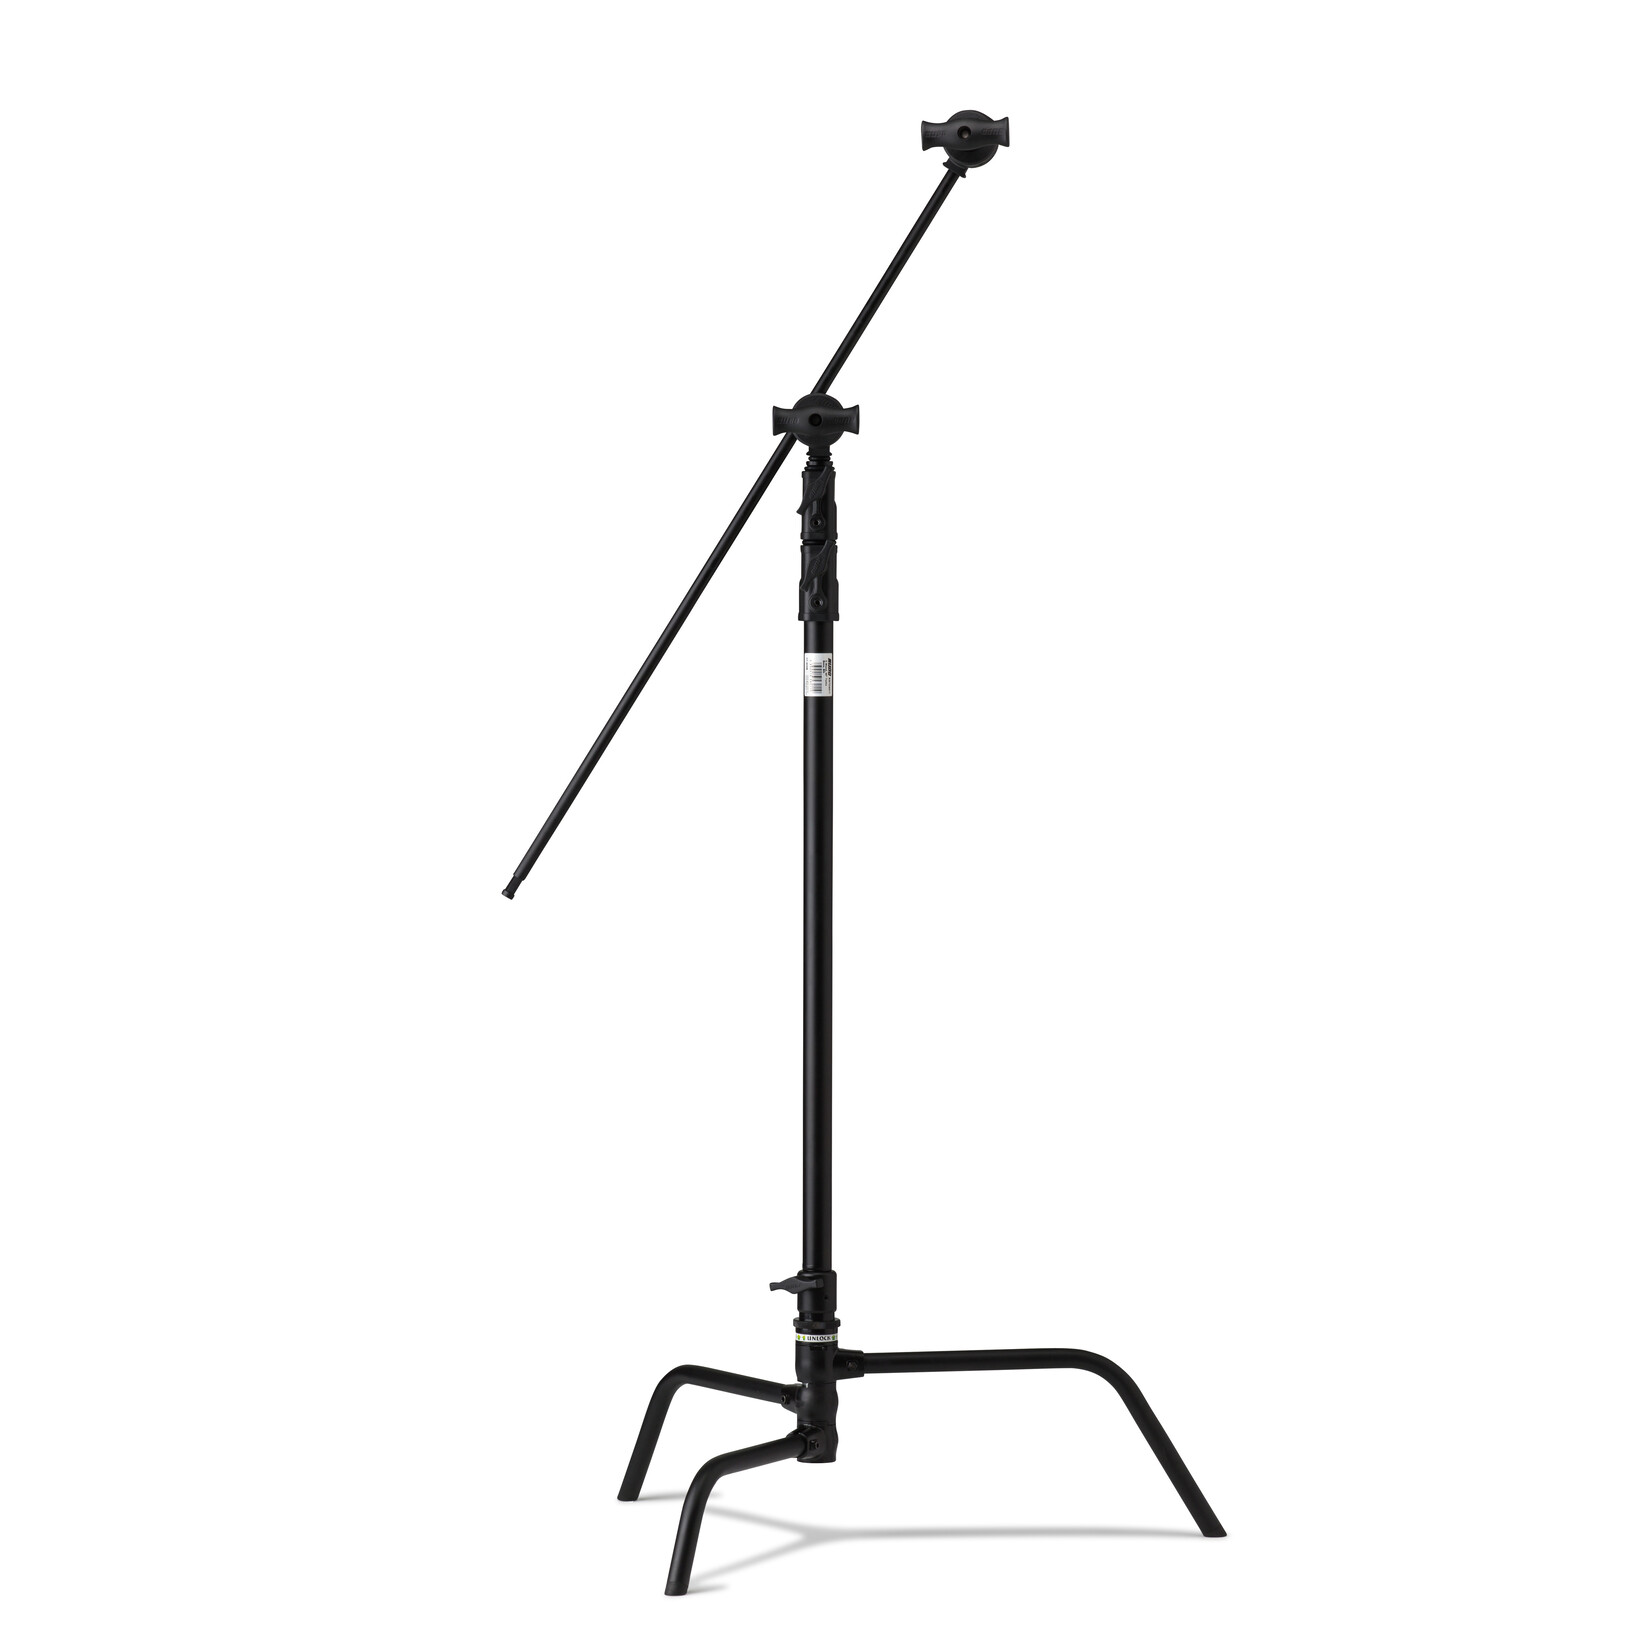 Kupo Kupo 40in Master C-Stand with Turtle Base Kit (Stand 2.5in Grip Head & 40in Grip Arm with Hex Stud) - Black